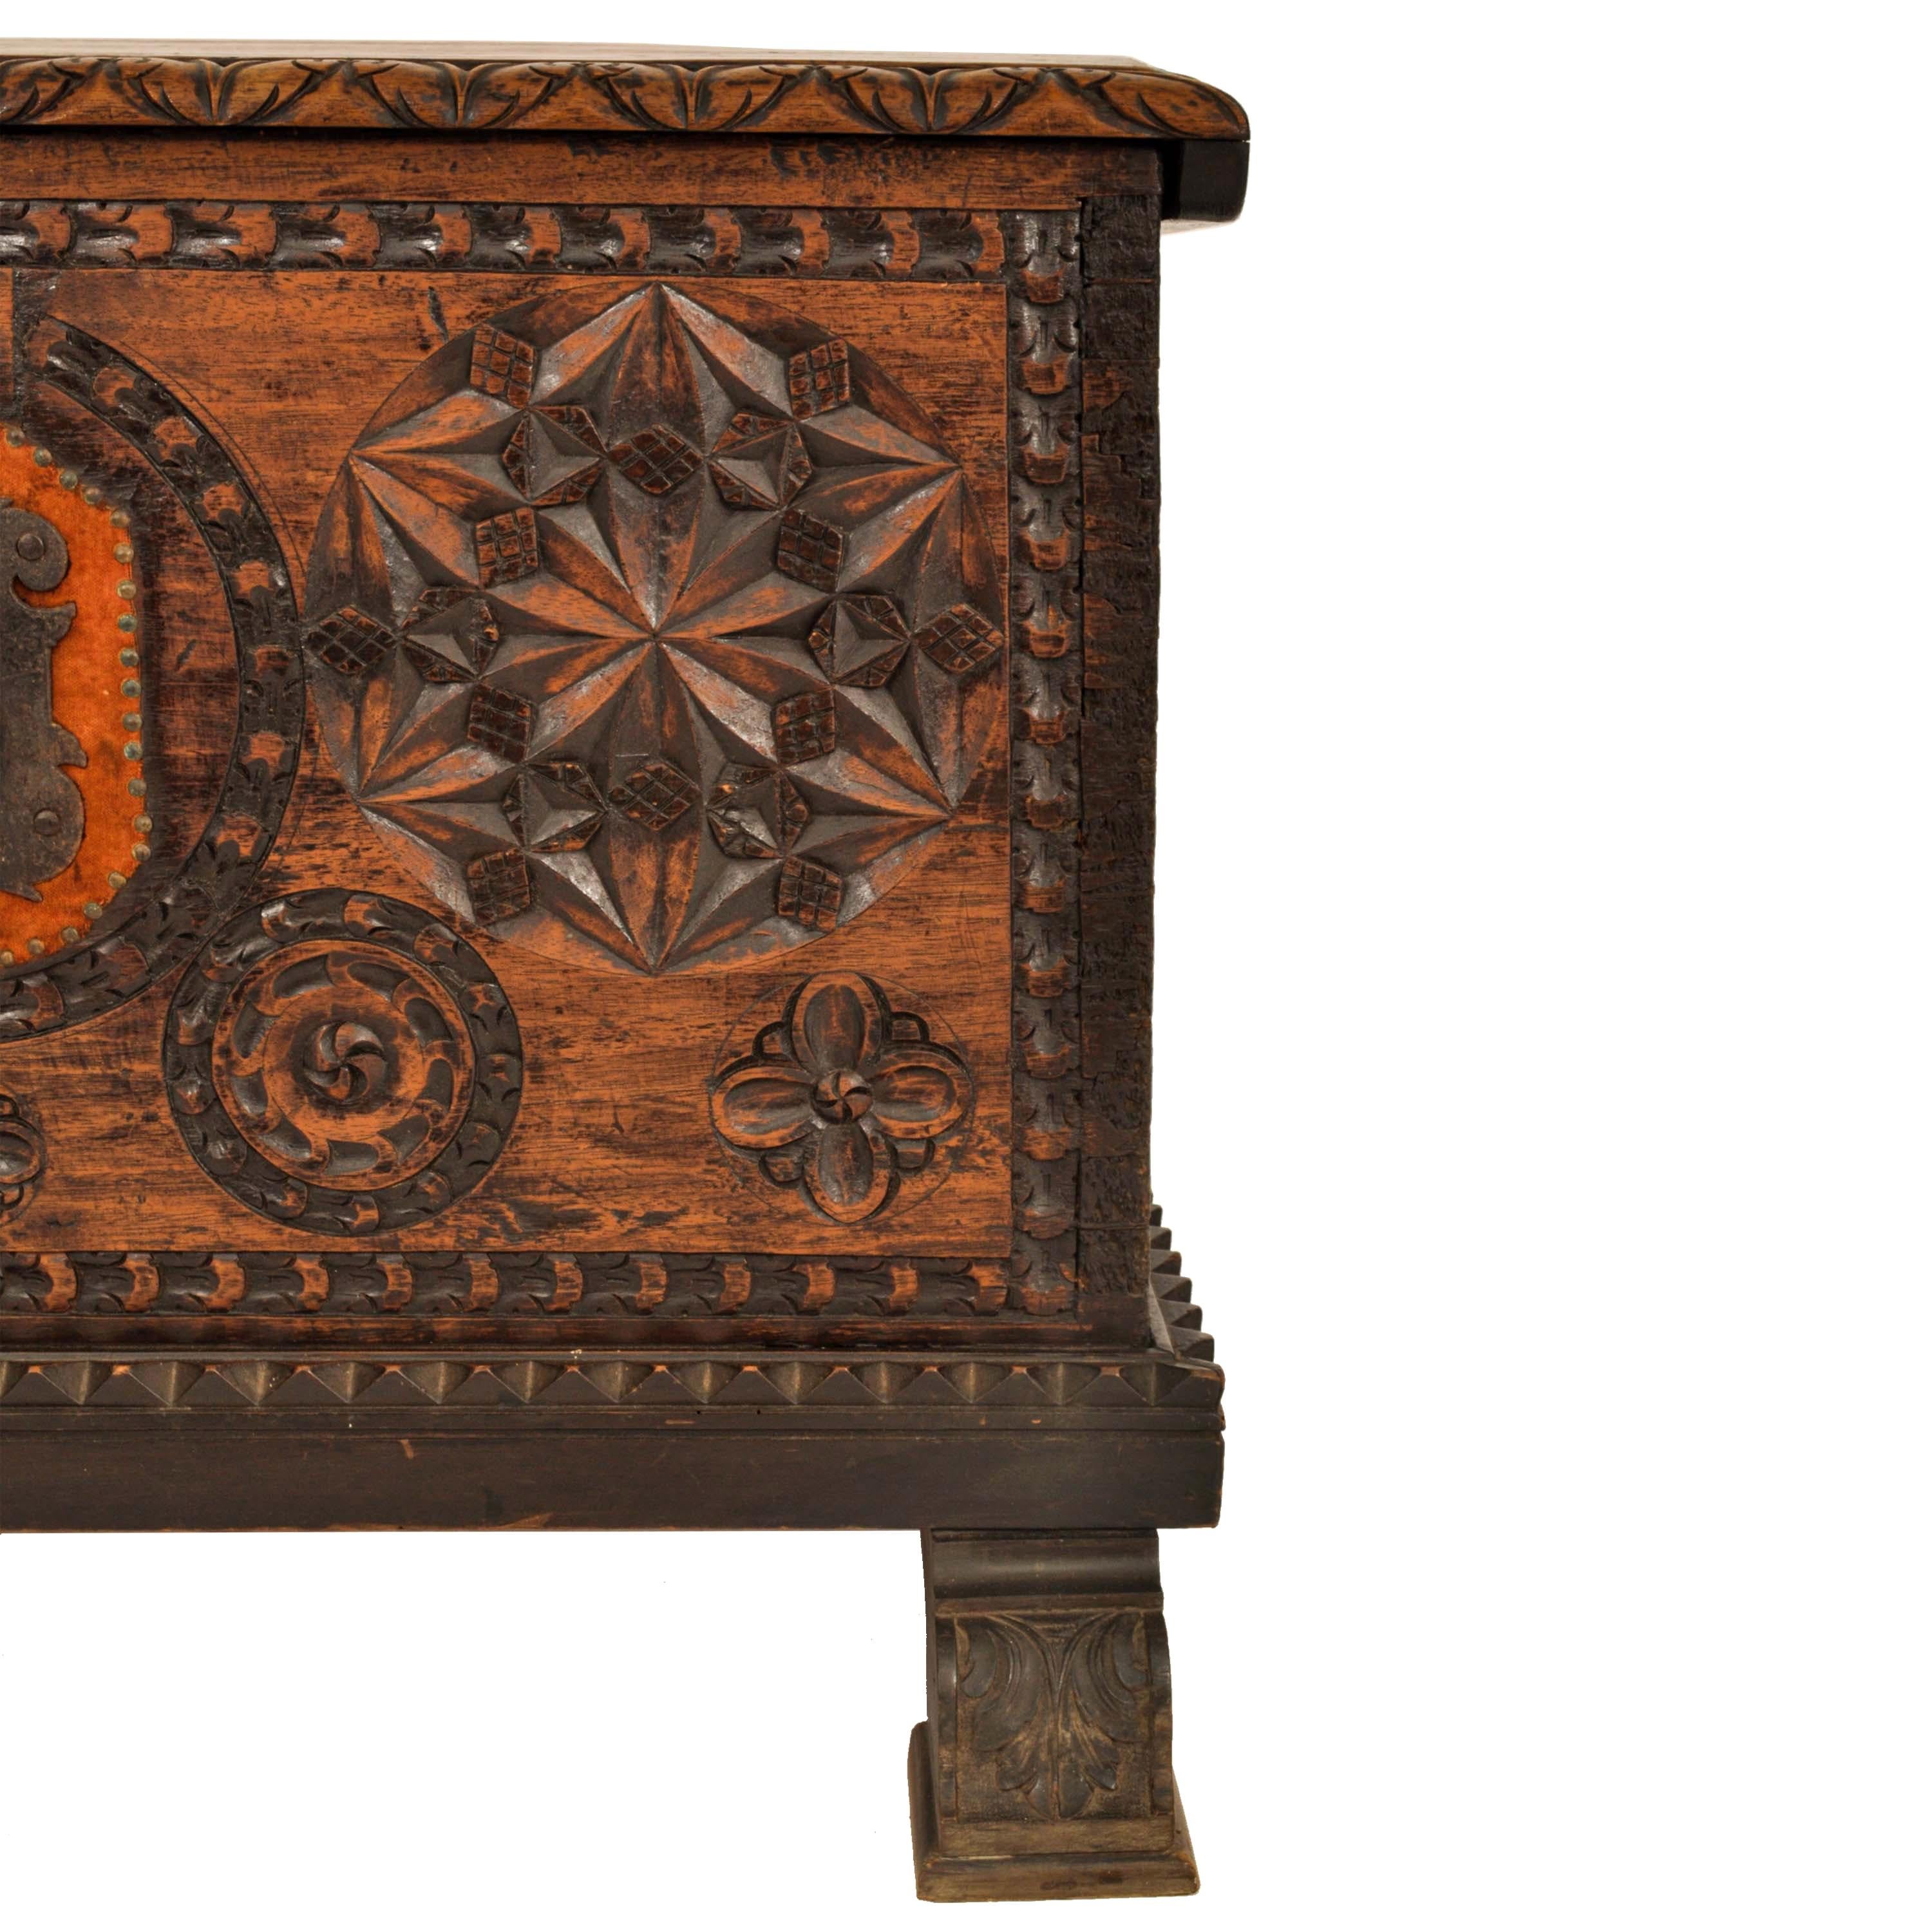 Antique Scandinavian Pine Baroque Folk Art Carved Dowry Chest Trunk Coffer 1780 For Sale 11